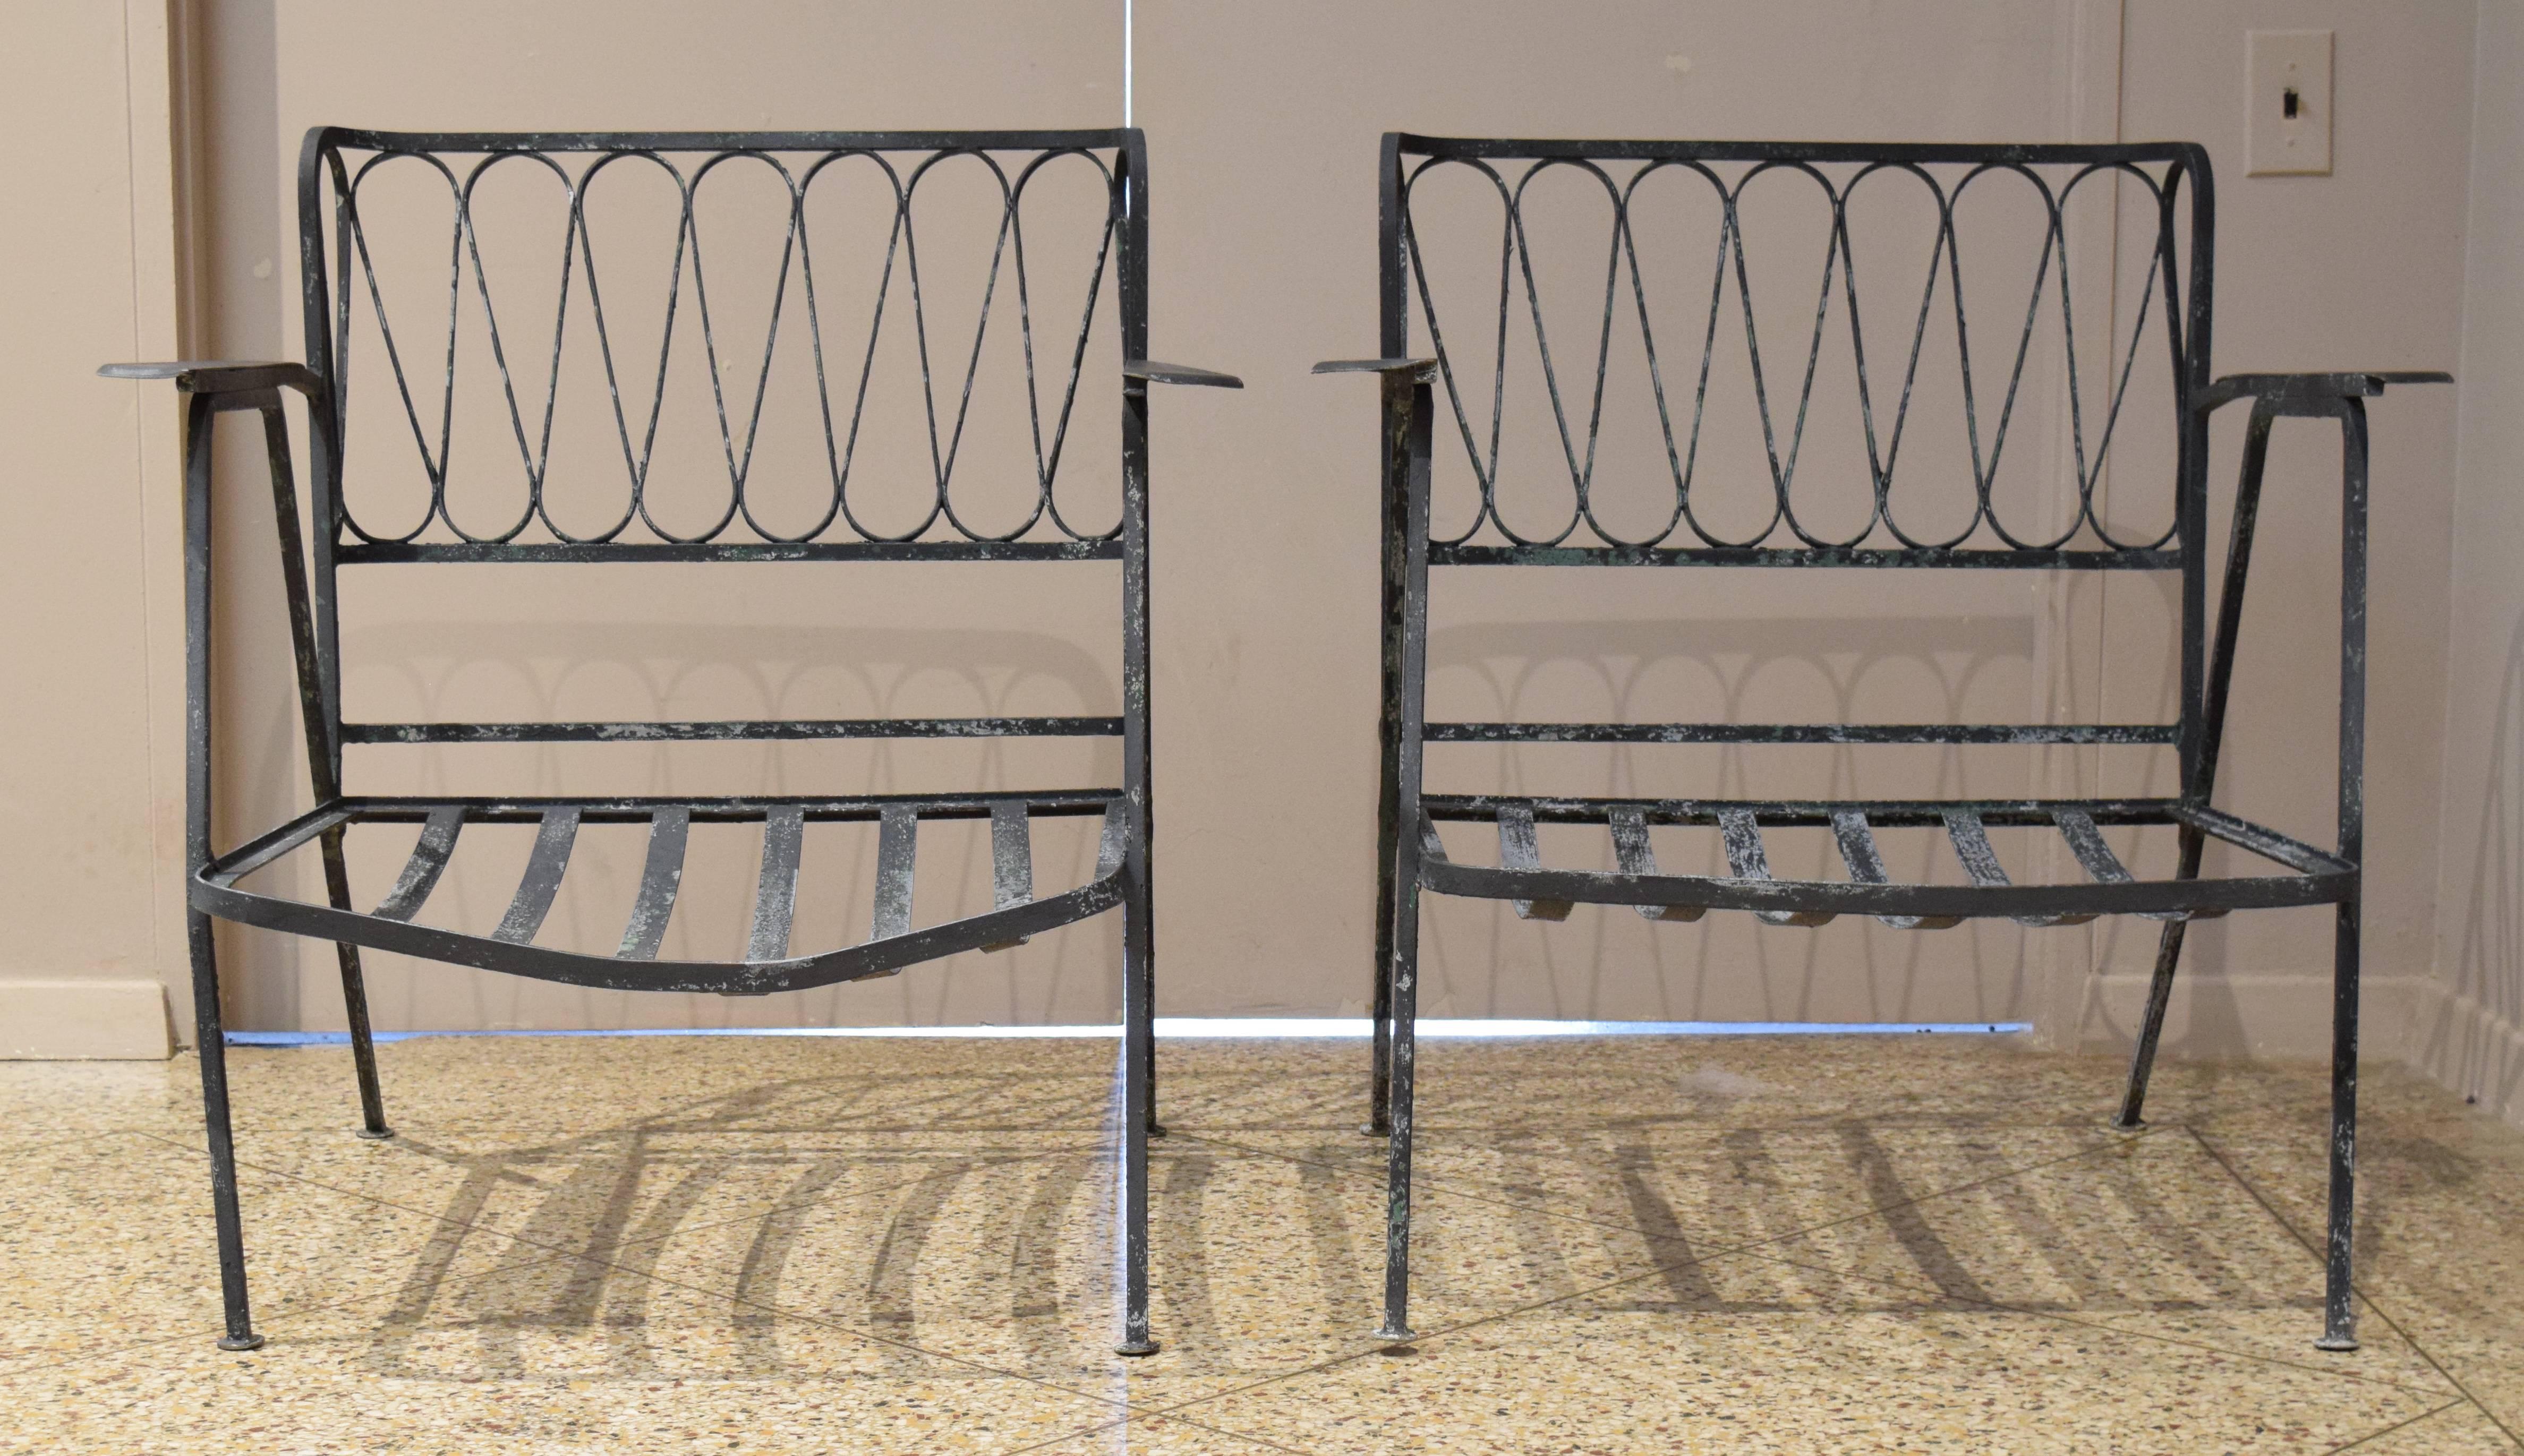 Pair of wrought iron armchairs from the ribbon line designed by Maurizio Tempestini for the John B. Salterini Co. Buy one for $2000 or both for $3000.